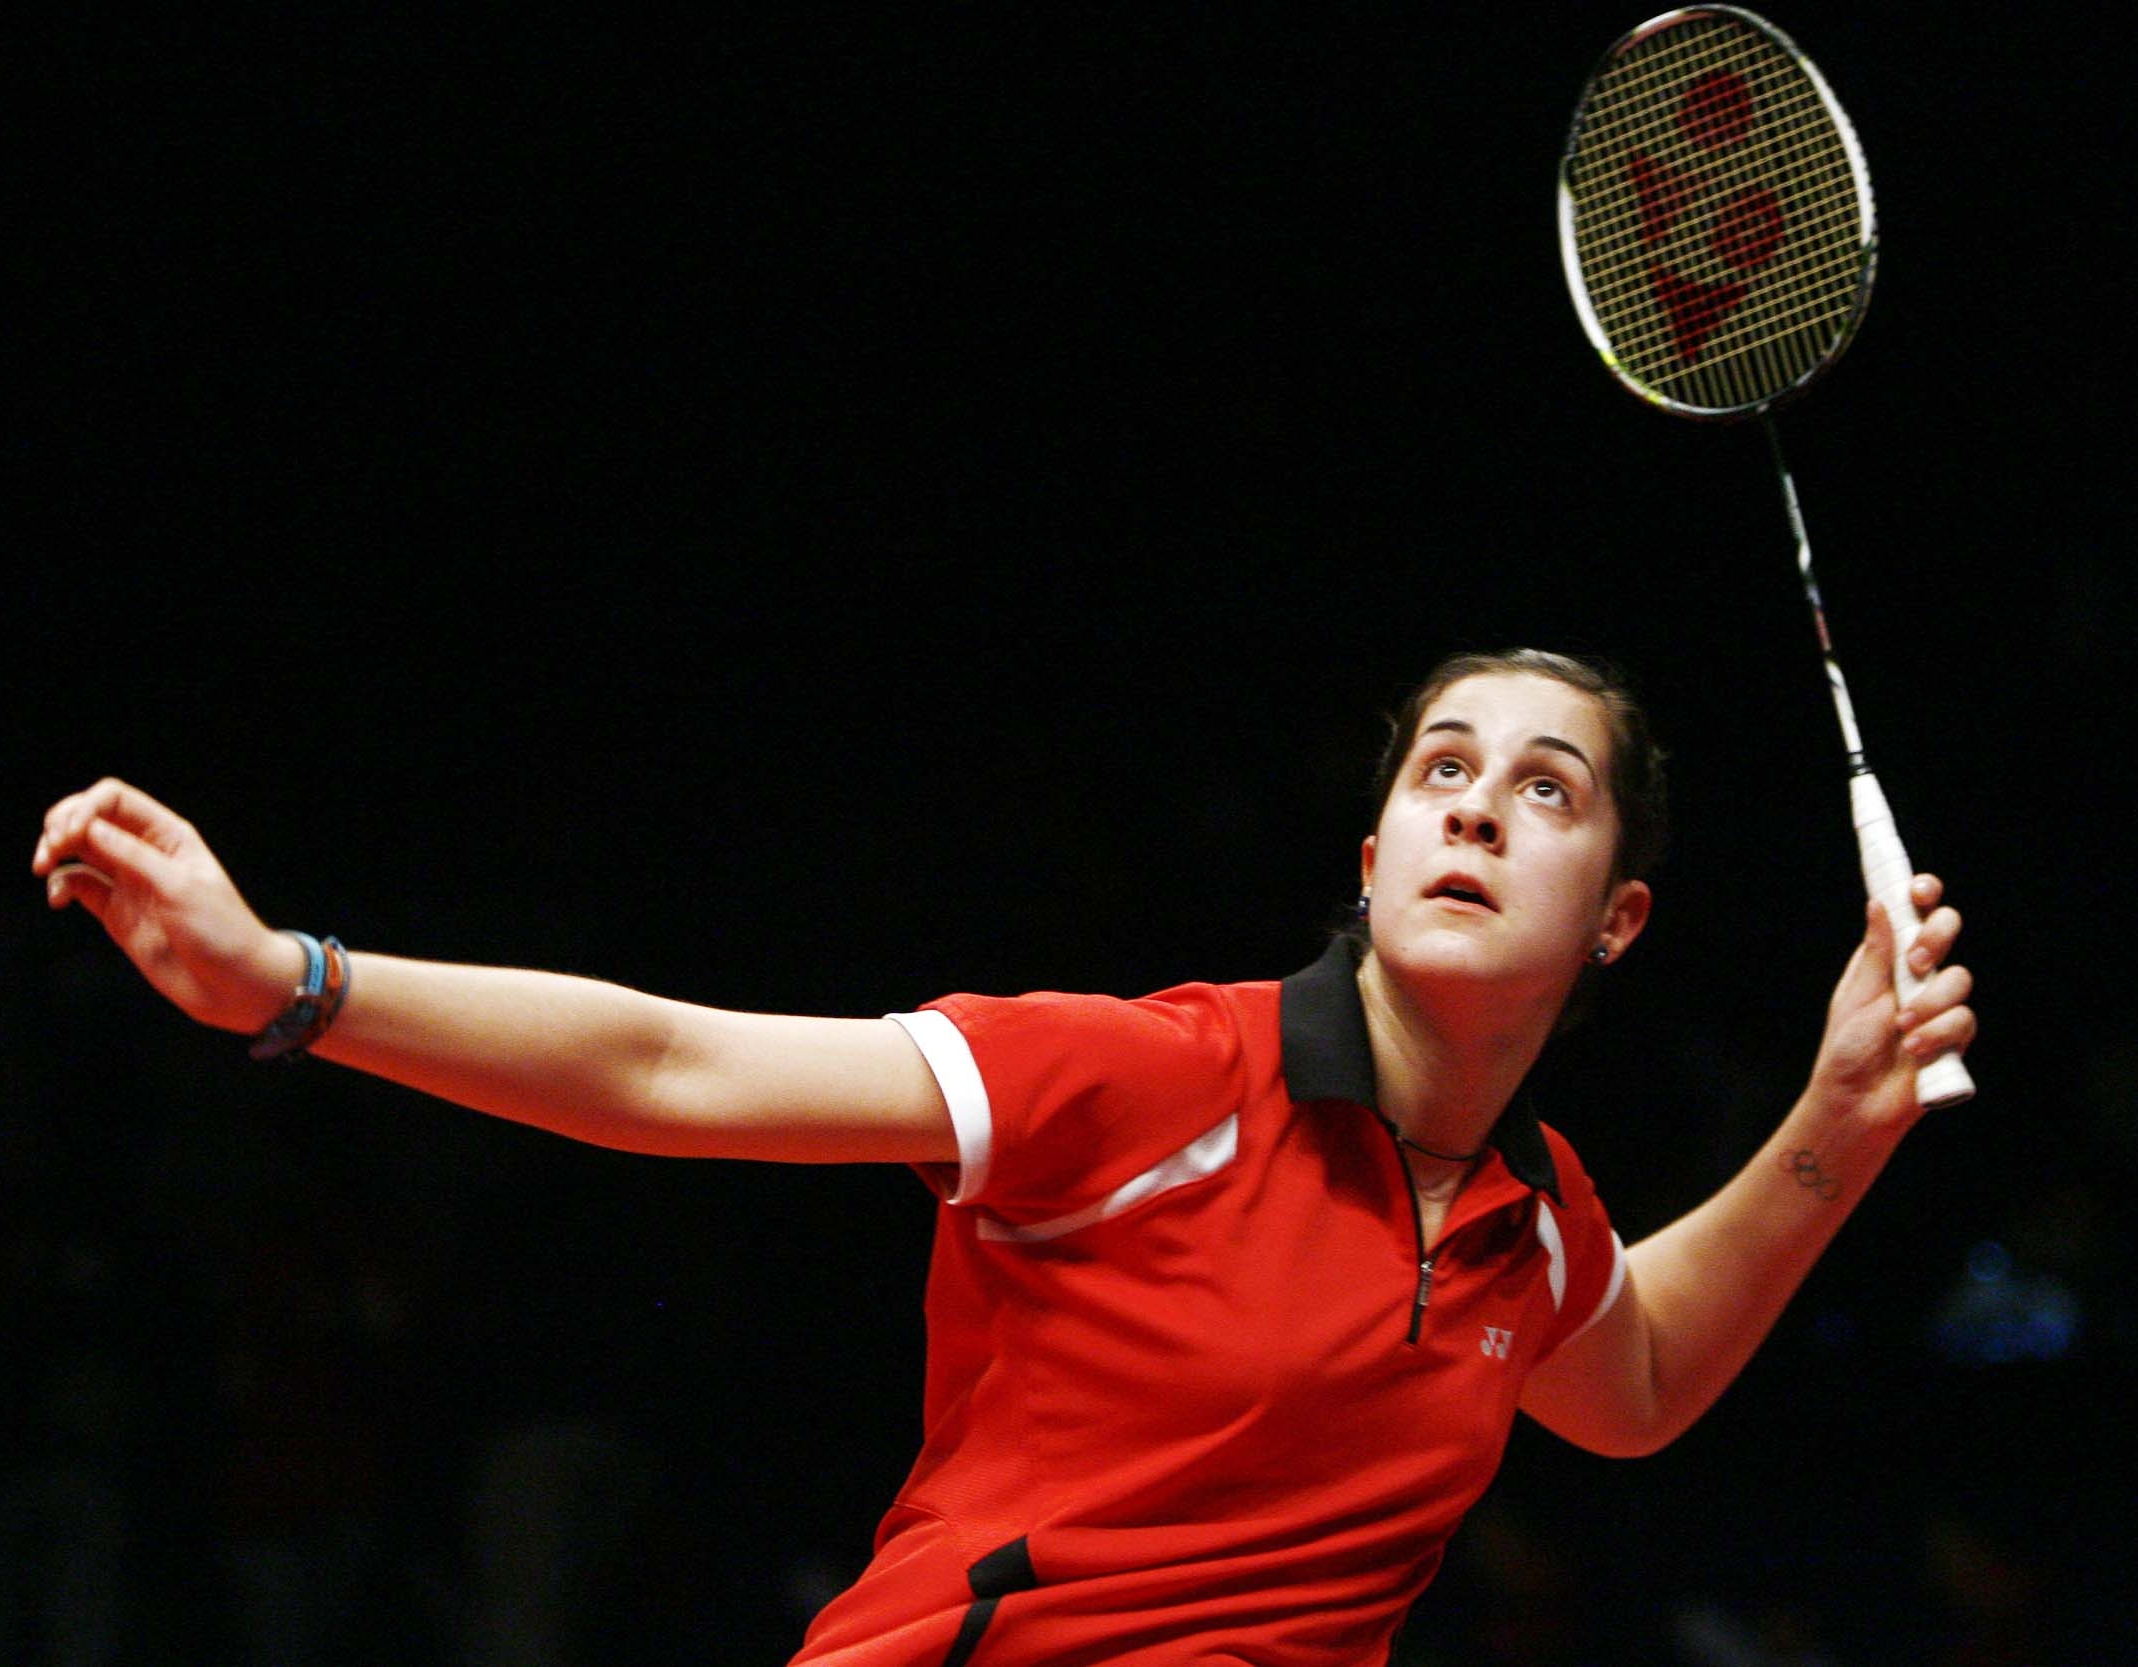 Badminton legend Carolina Marina will give her medals to the Medical professionals in Spain for their service 